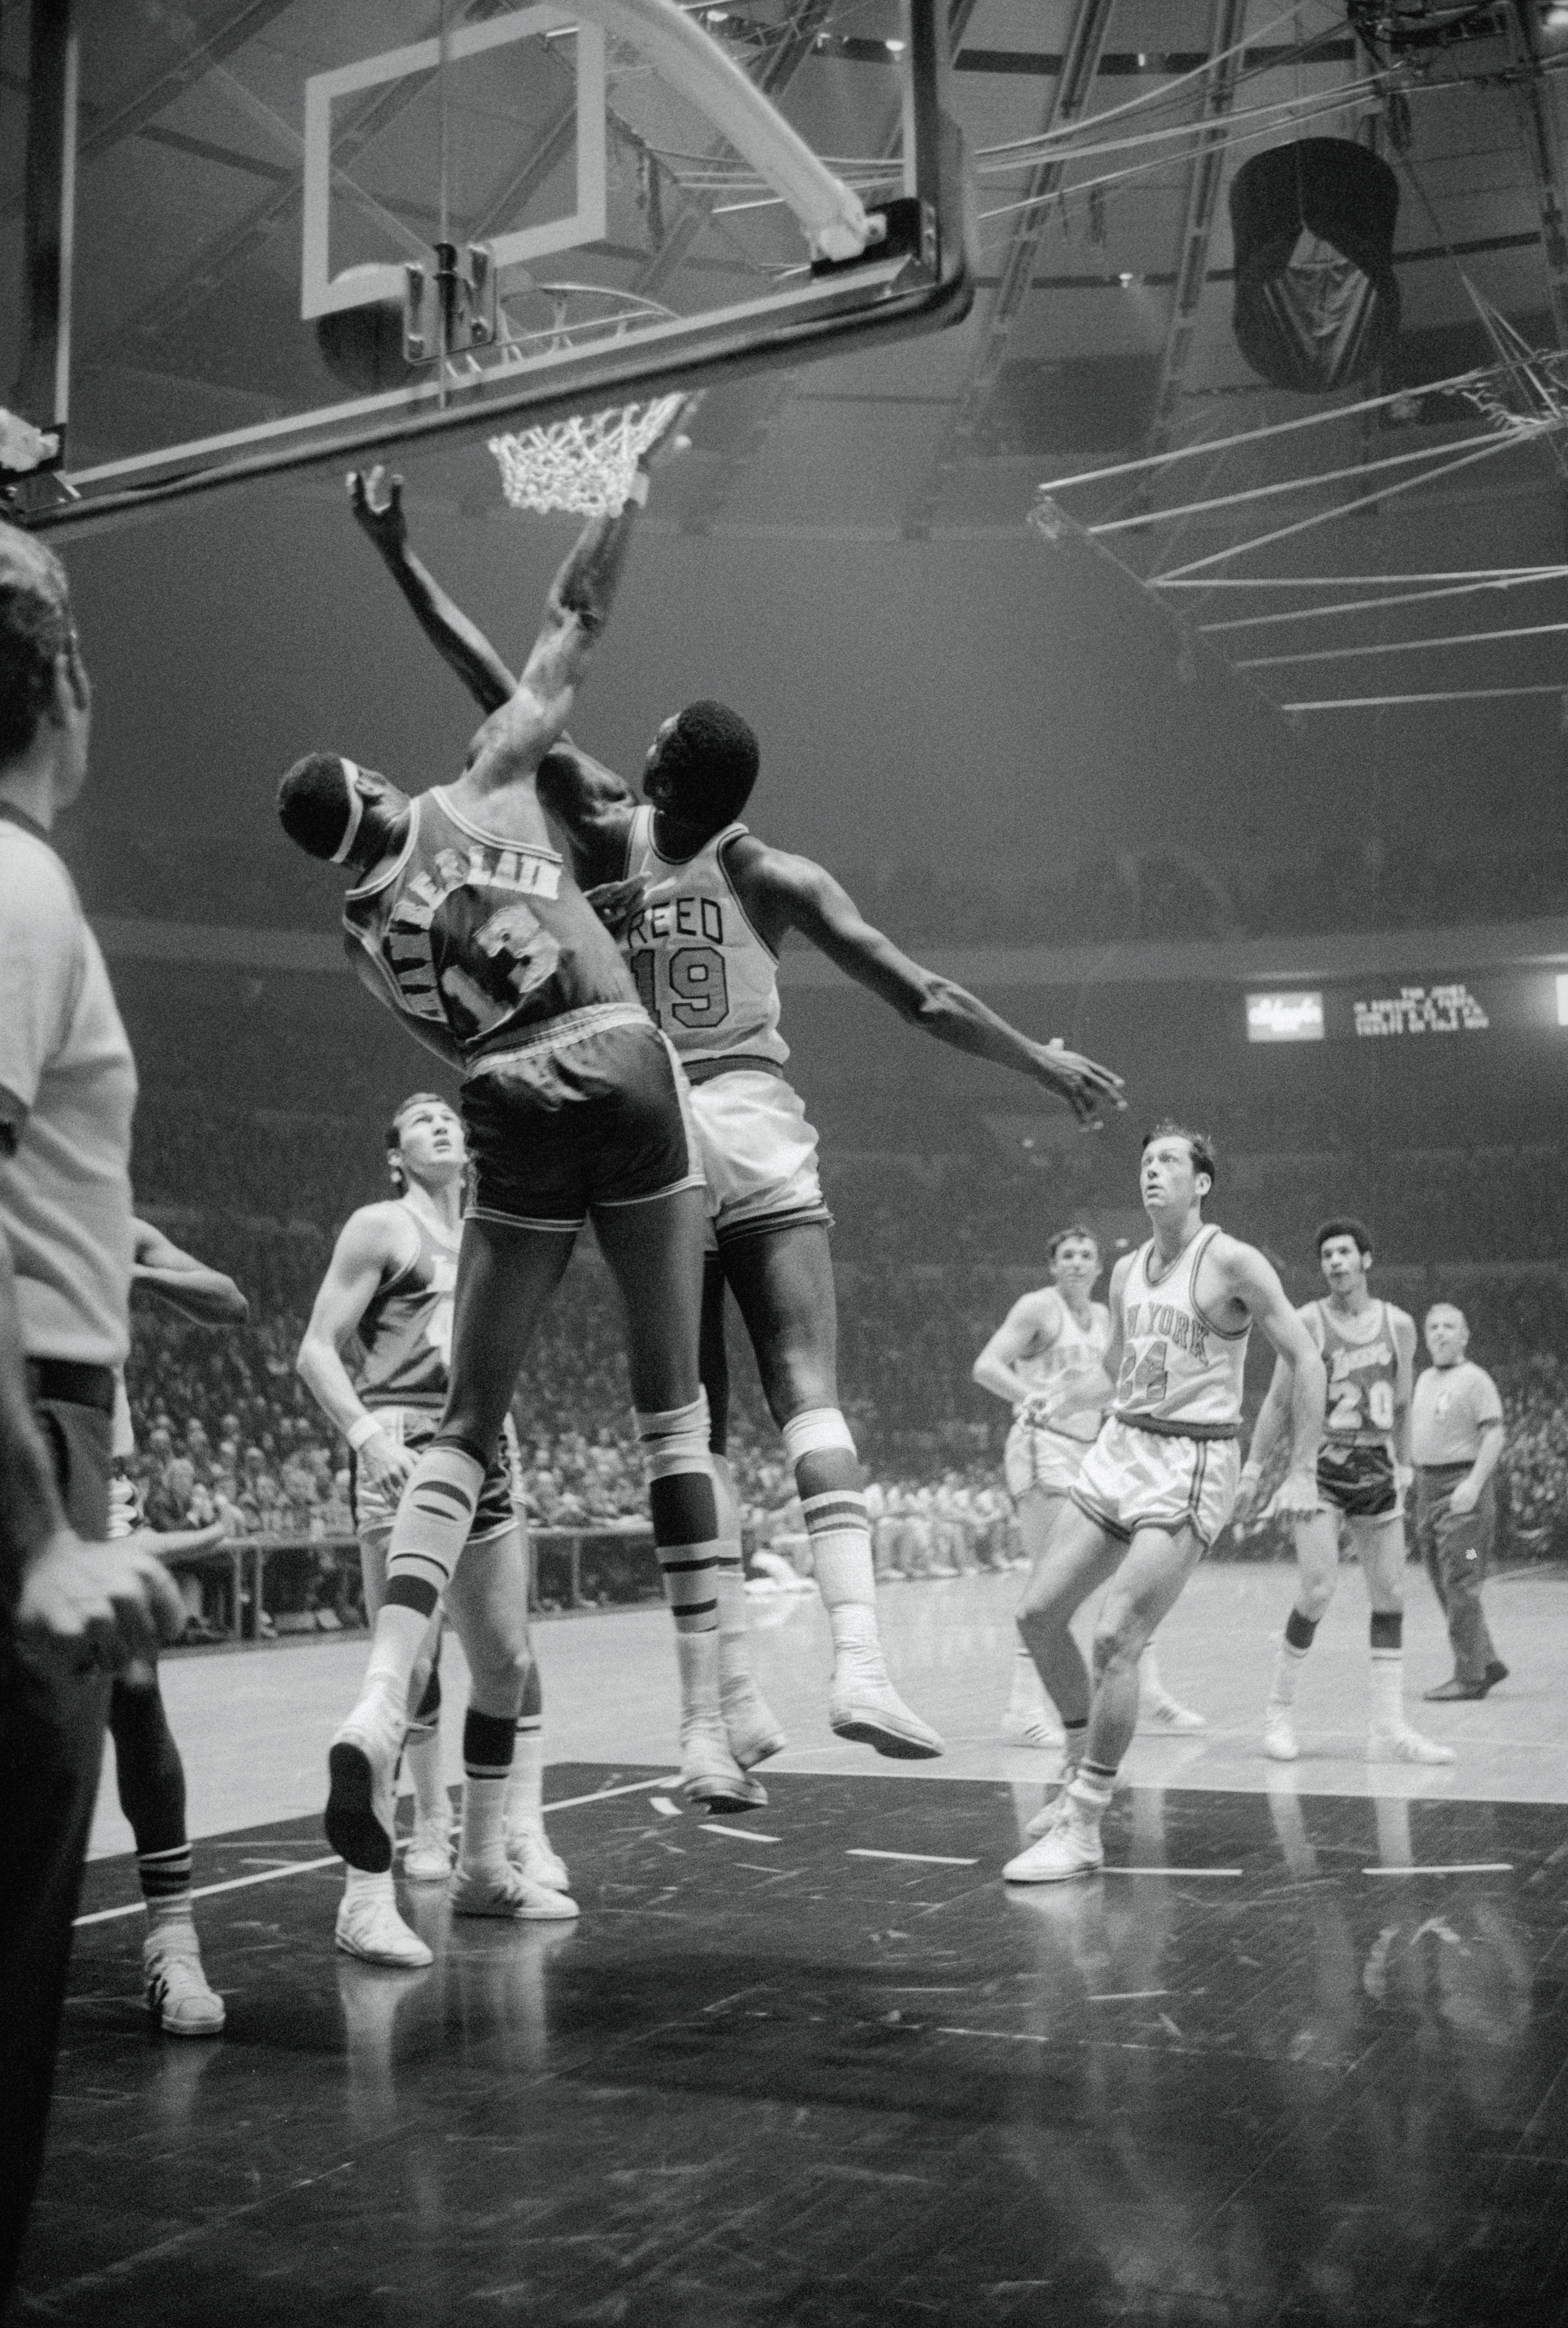 Wilt Chamberlain and Willis Reed Going for Basketball